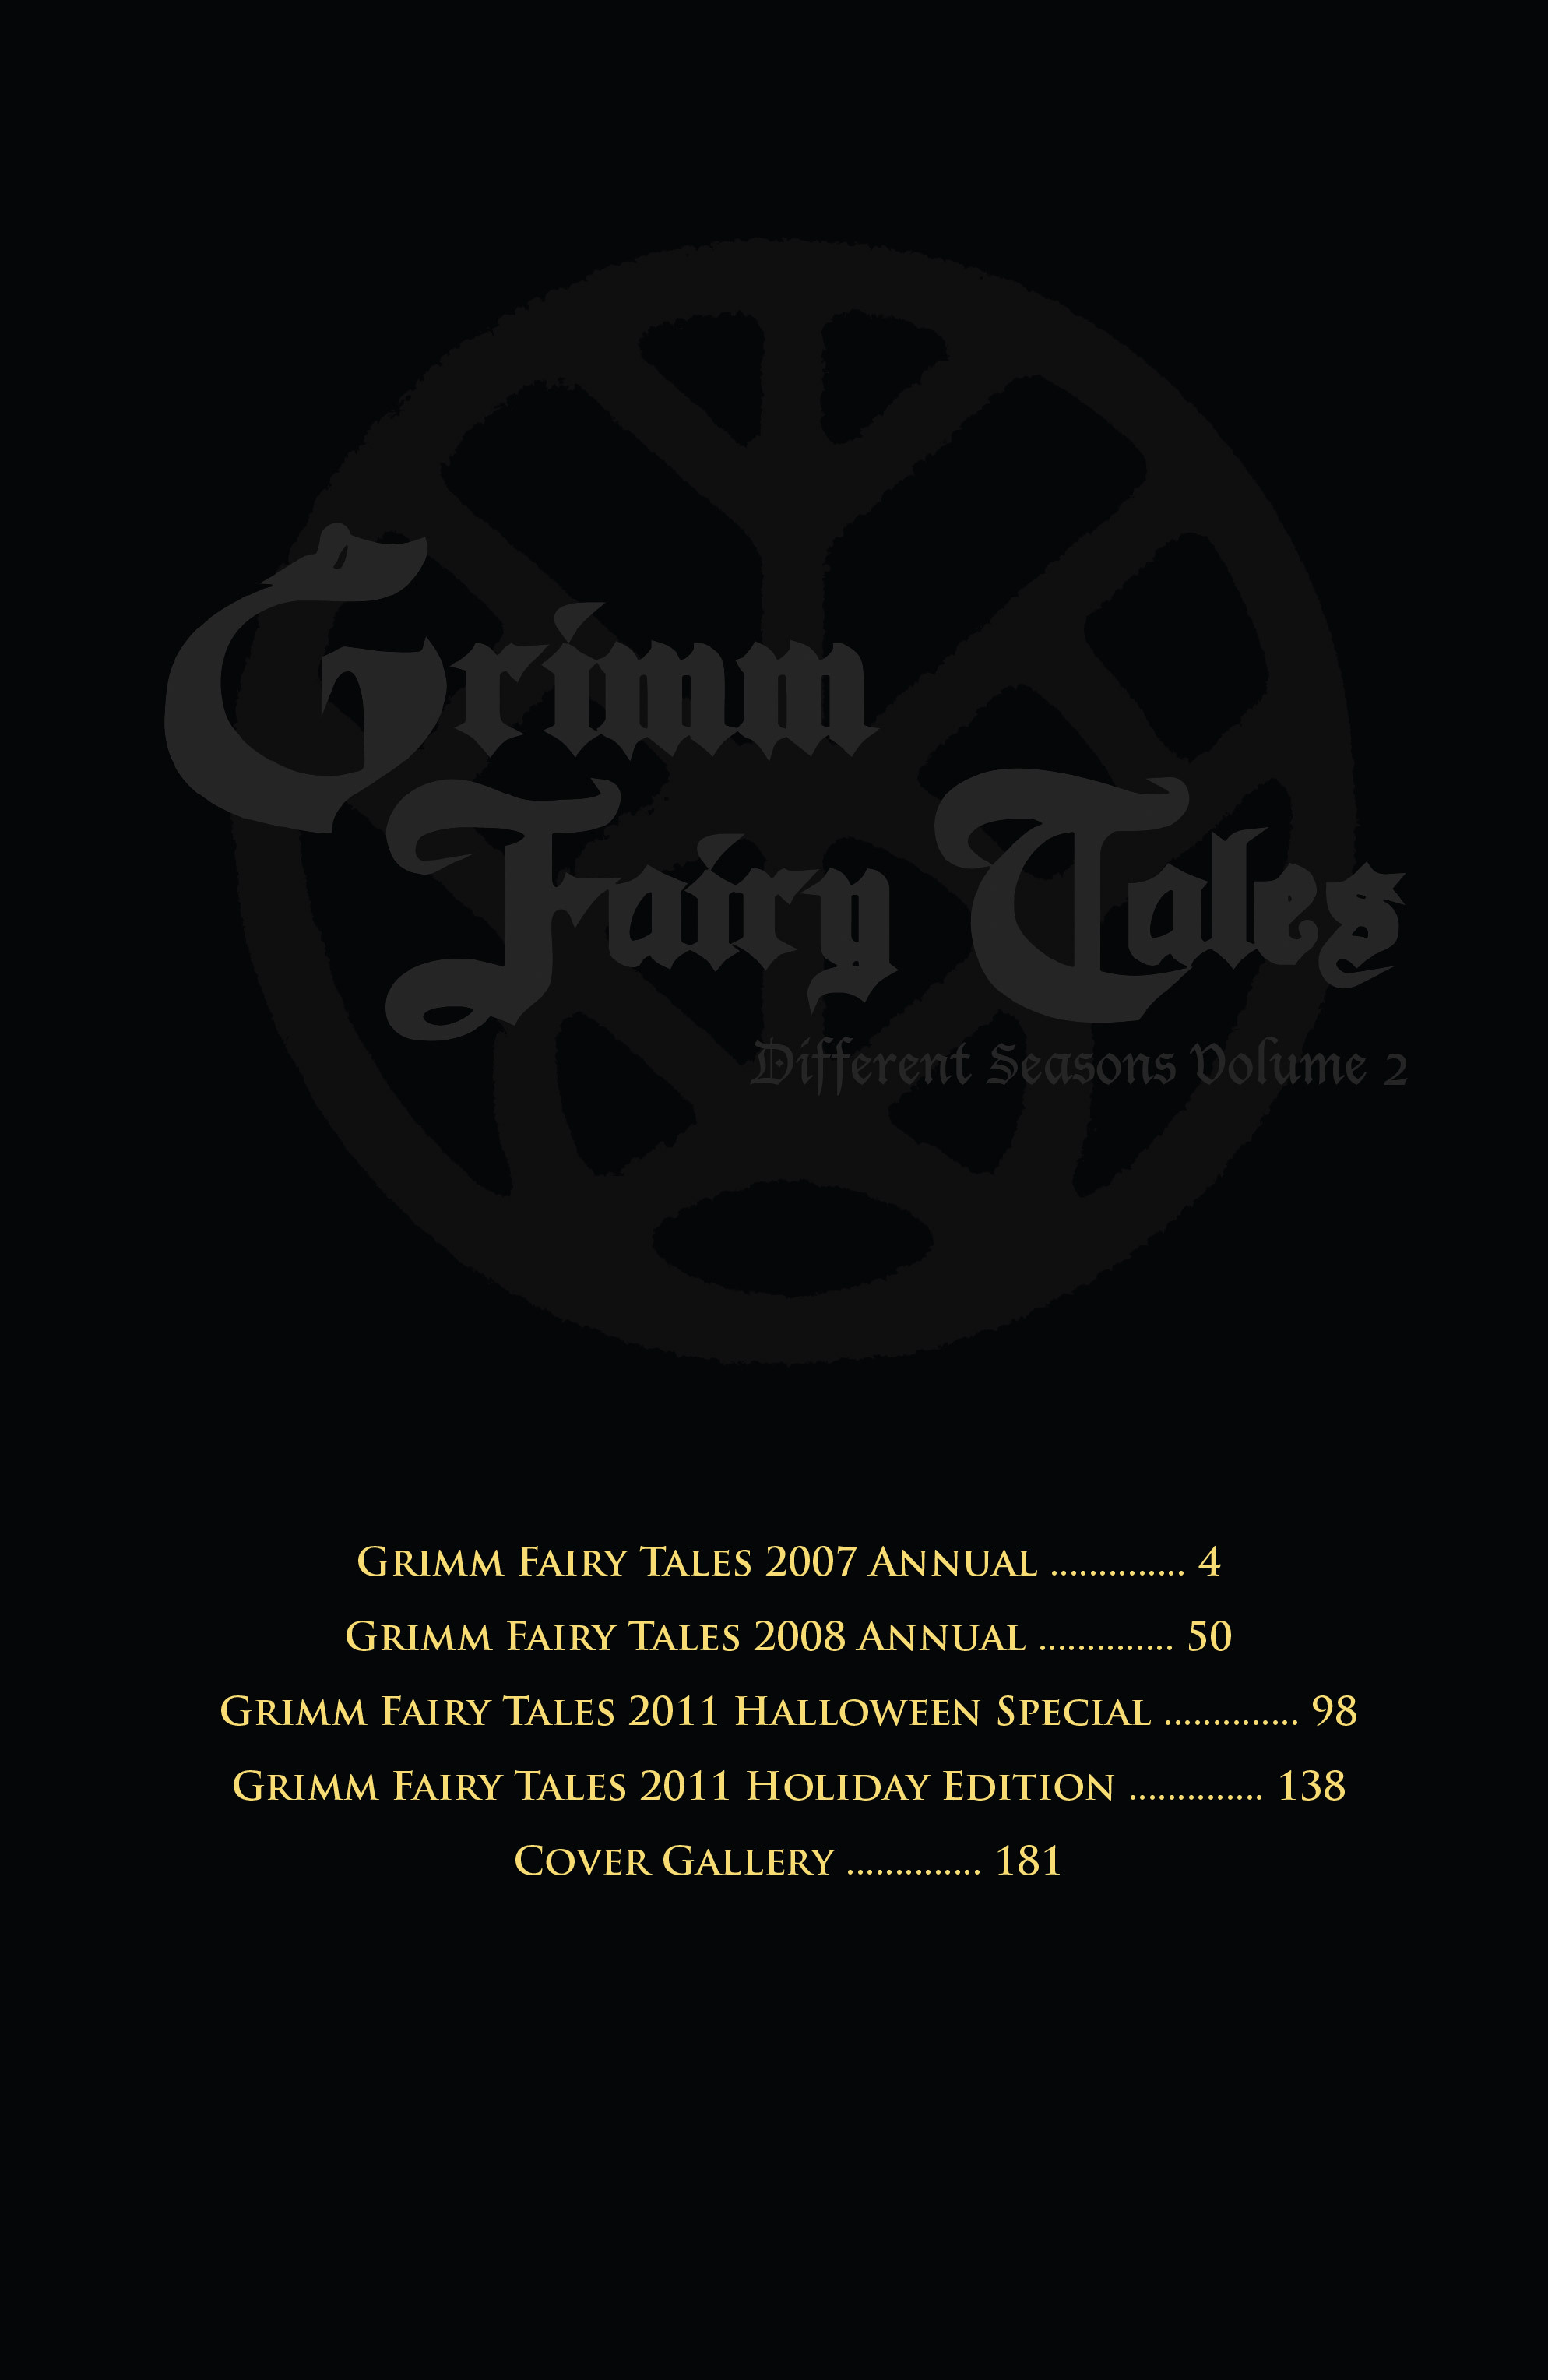 Read online Grimm Fairy Tales: Different Seasons comic -  Issue # TPB 2 - 4